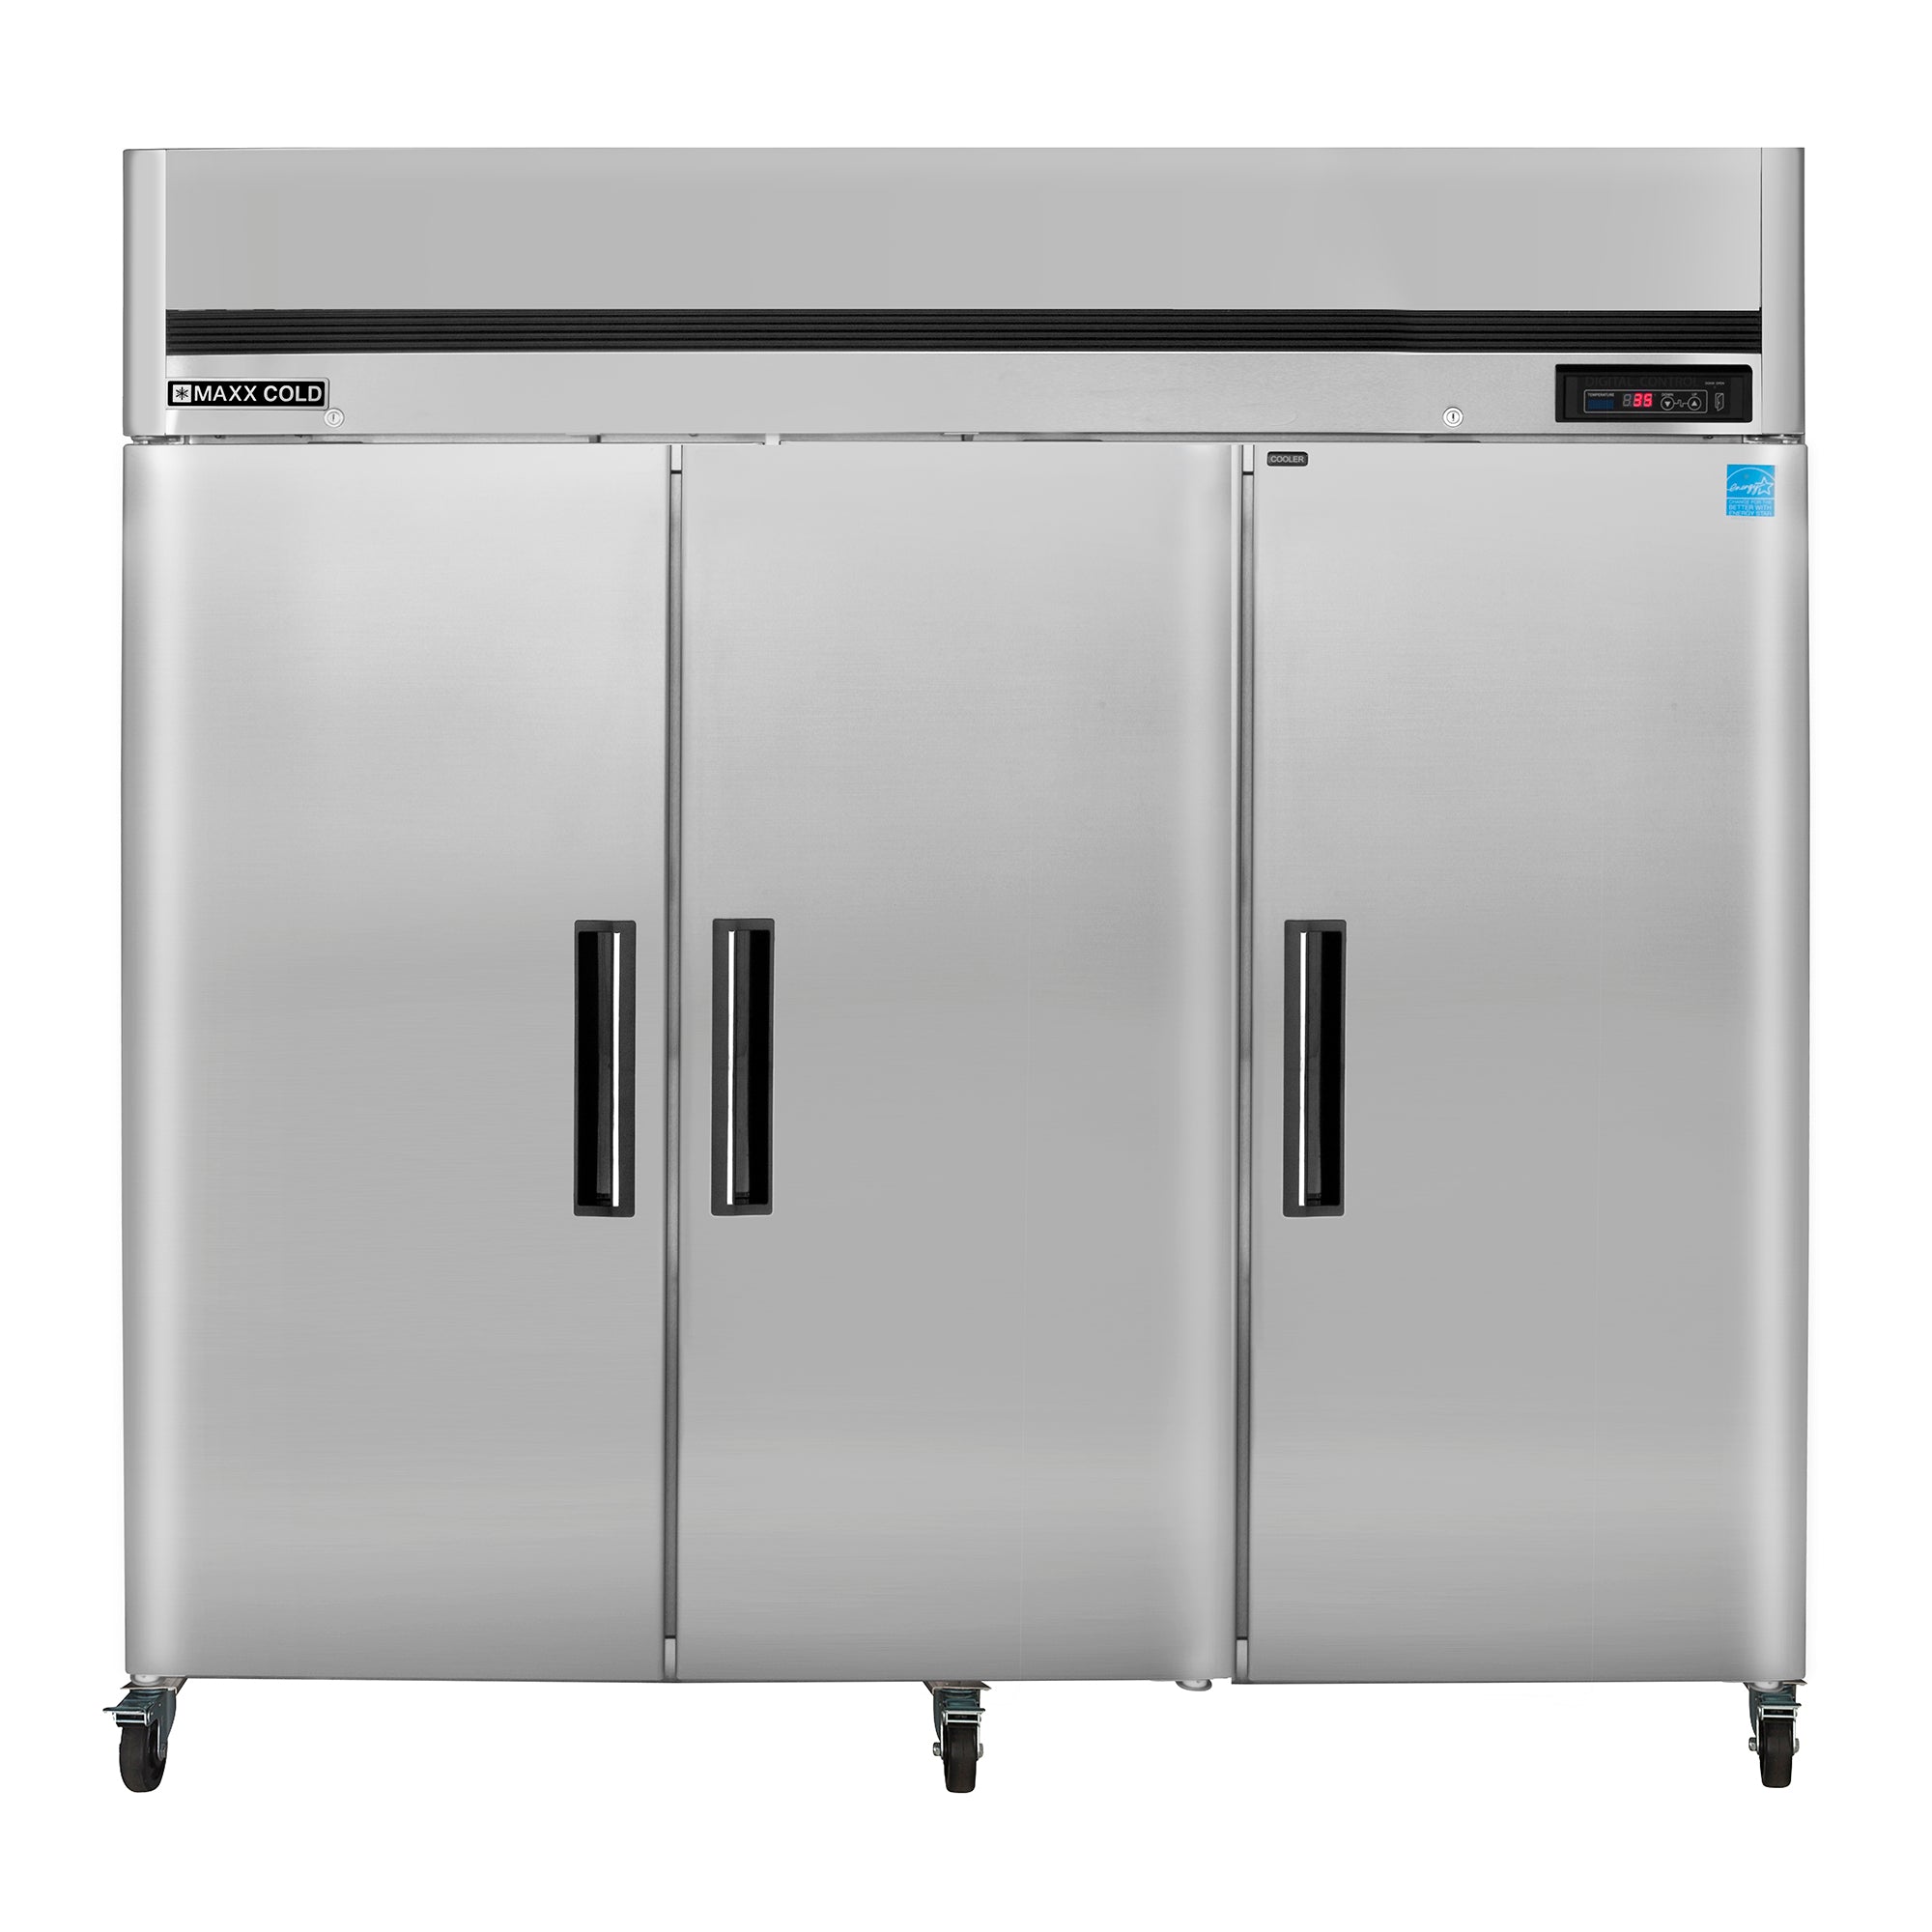 Maxx Cold - MCRT-72FDHC, Maxx Cold Triple Door Reach-In Refrigerator, Top Mount, 81"W, 72 cu. ft. Storage Capacity, in Stainless Steel